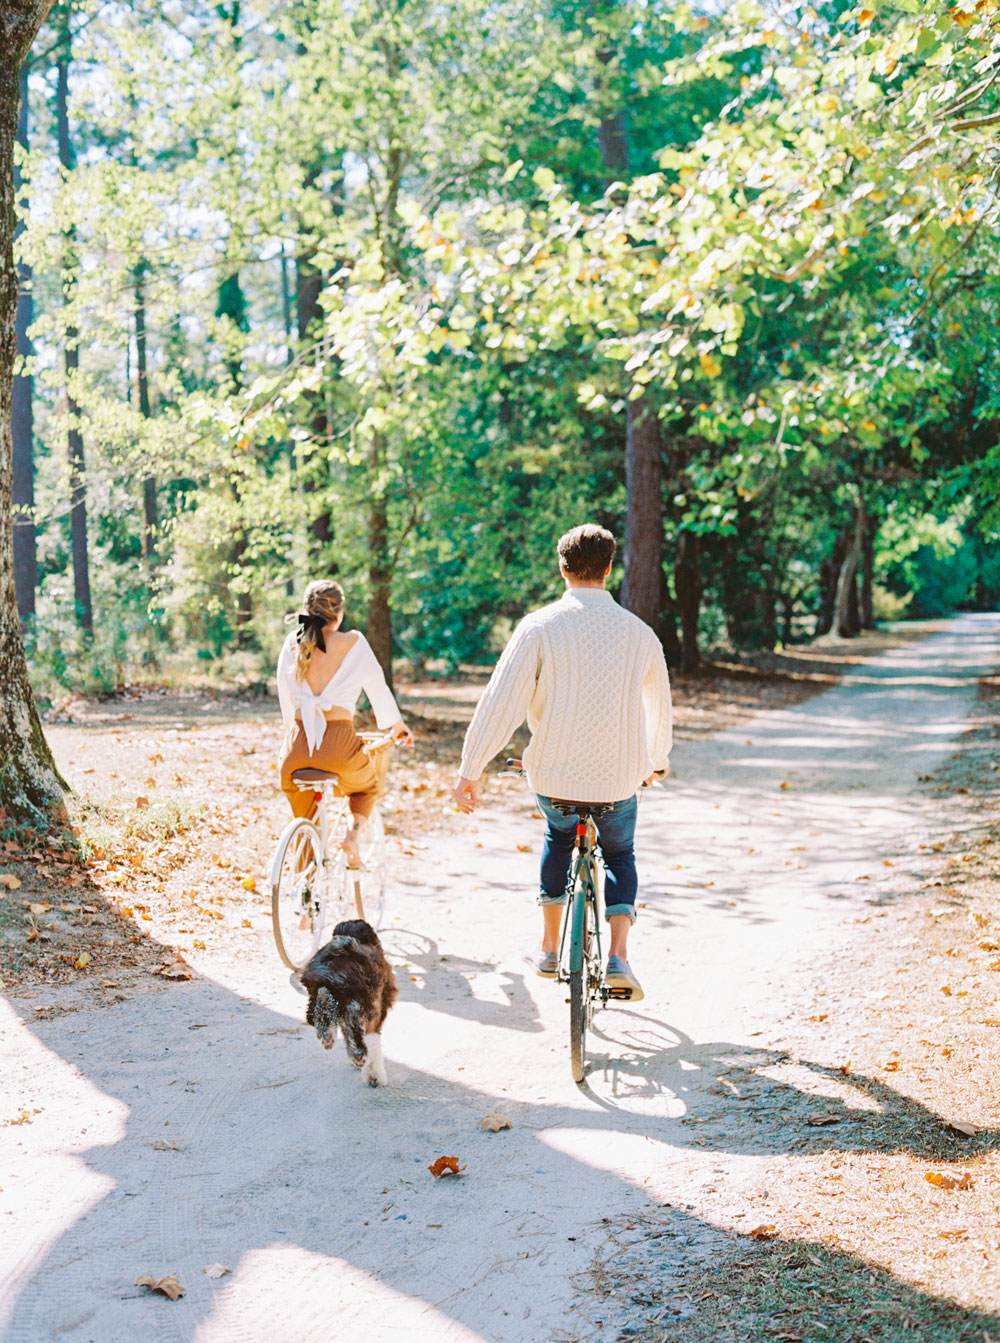 Couple riding bikes outdoors underneath an avenue of trees with their dog